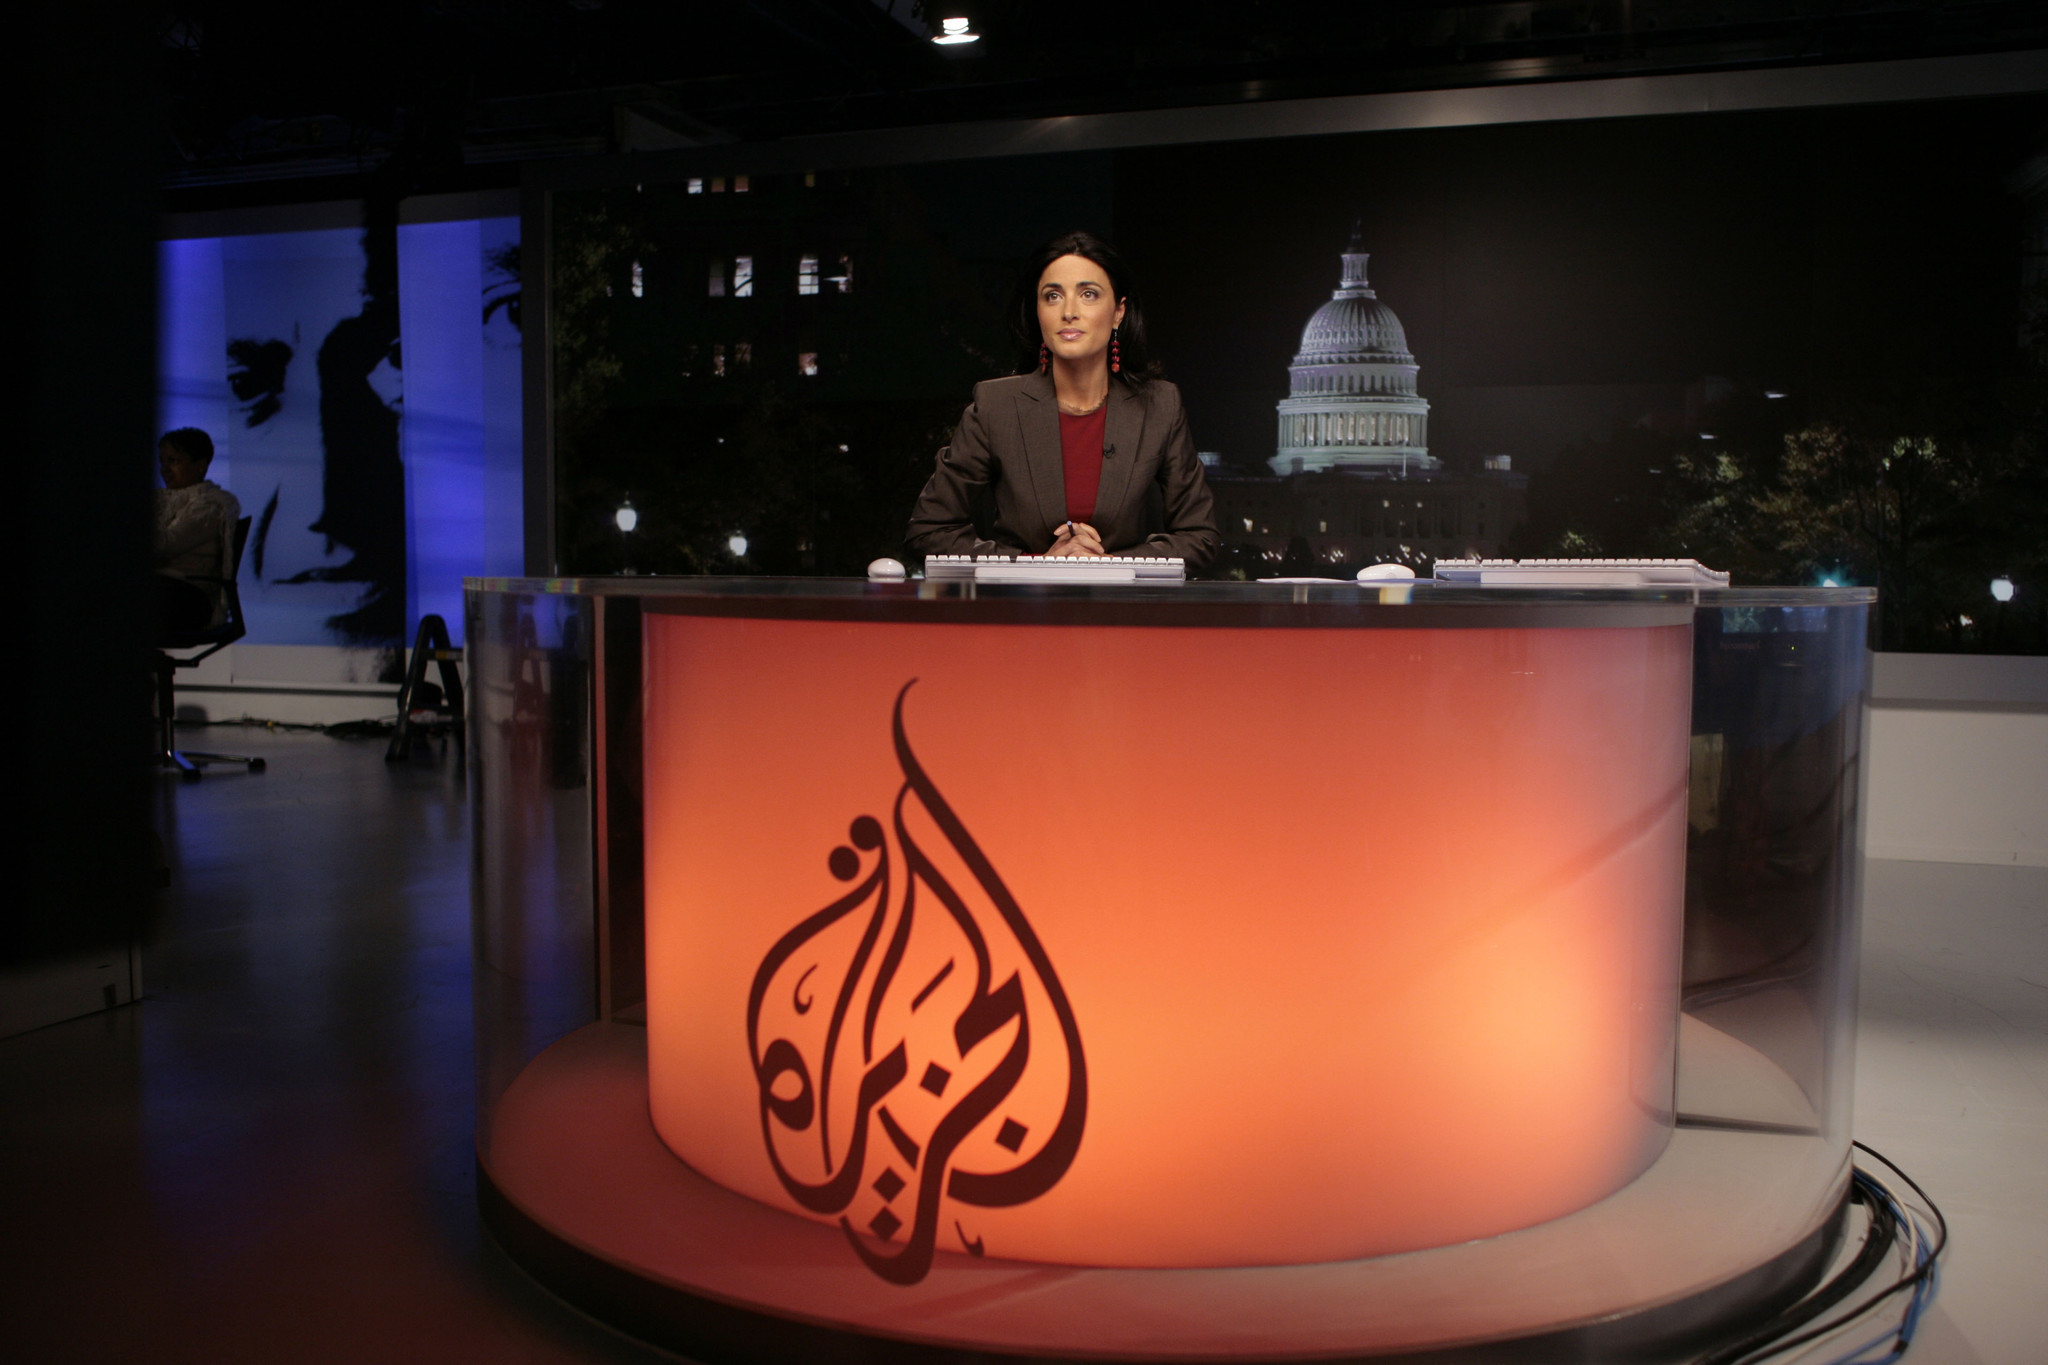 Of course Al Jazeera has a bias, but it\u0026#39;s not what most critics think ...